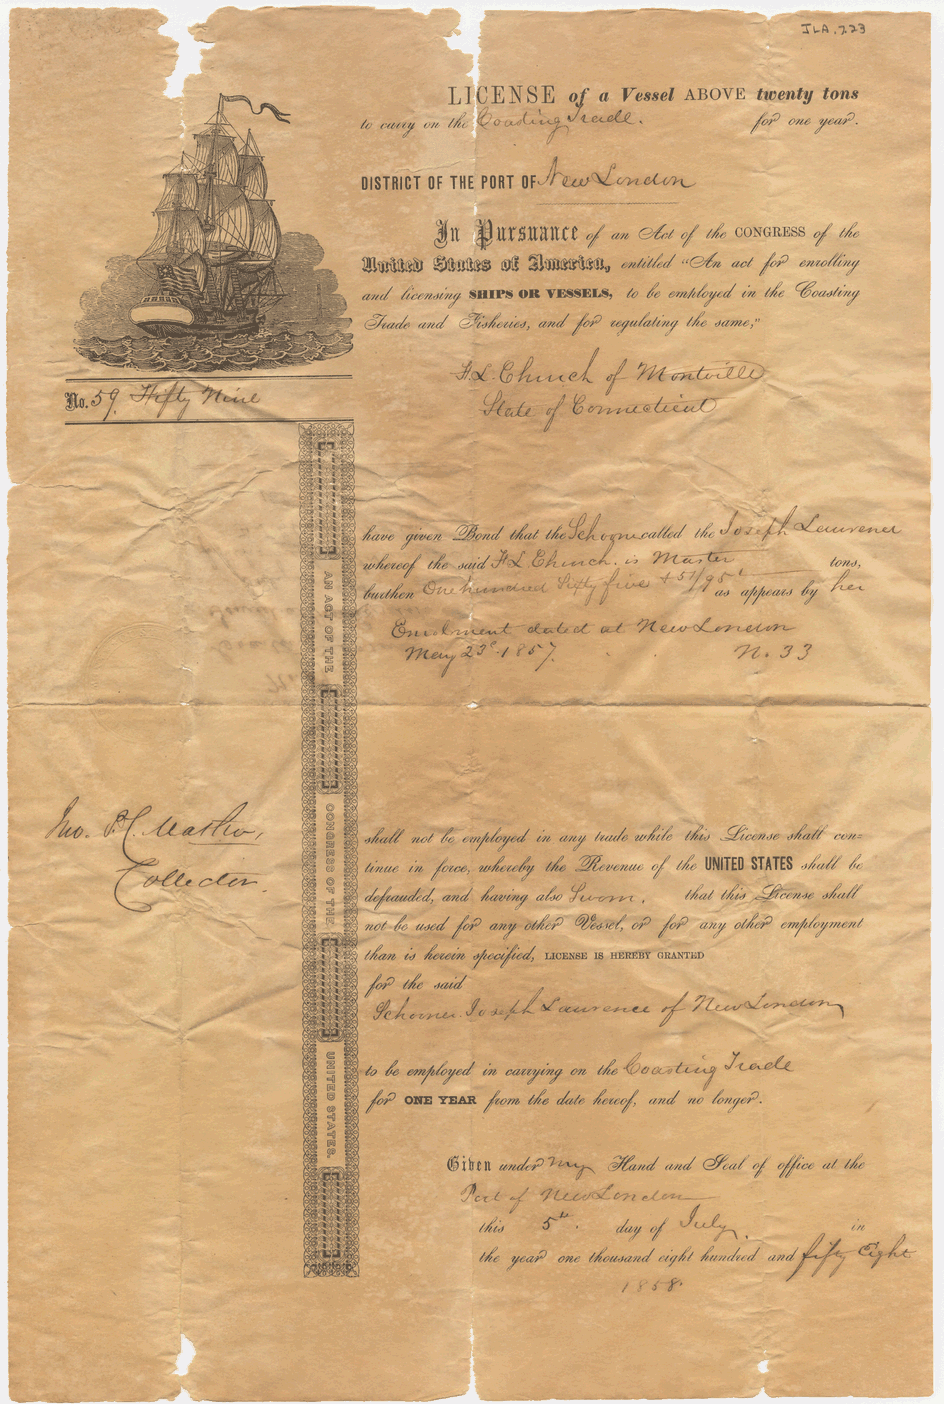 license for a vessel above 20 tons